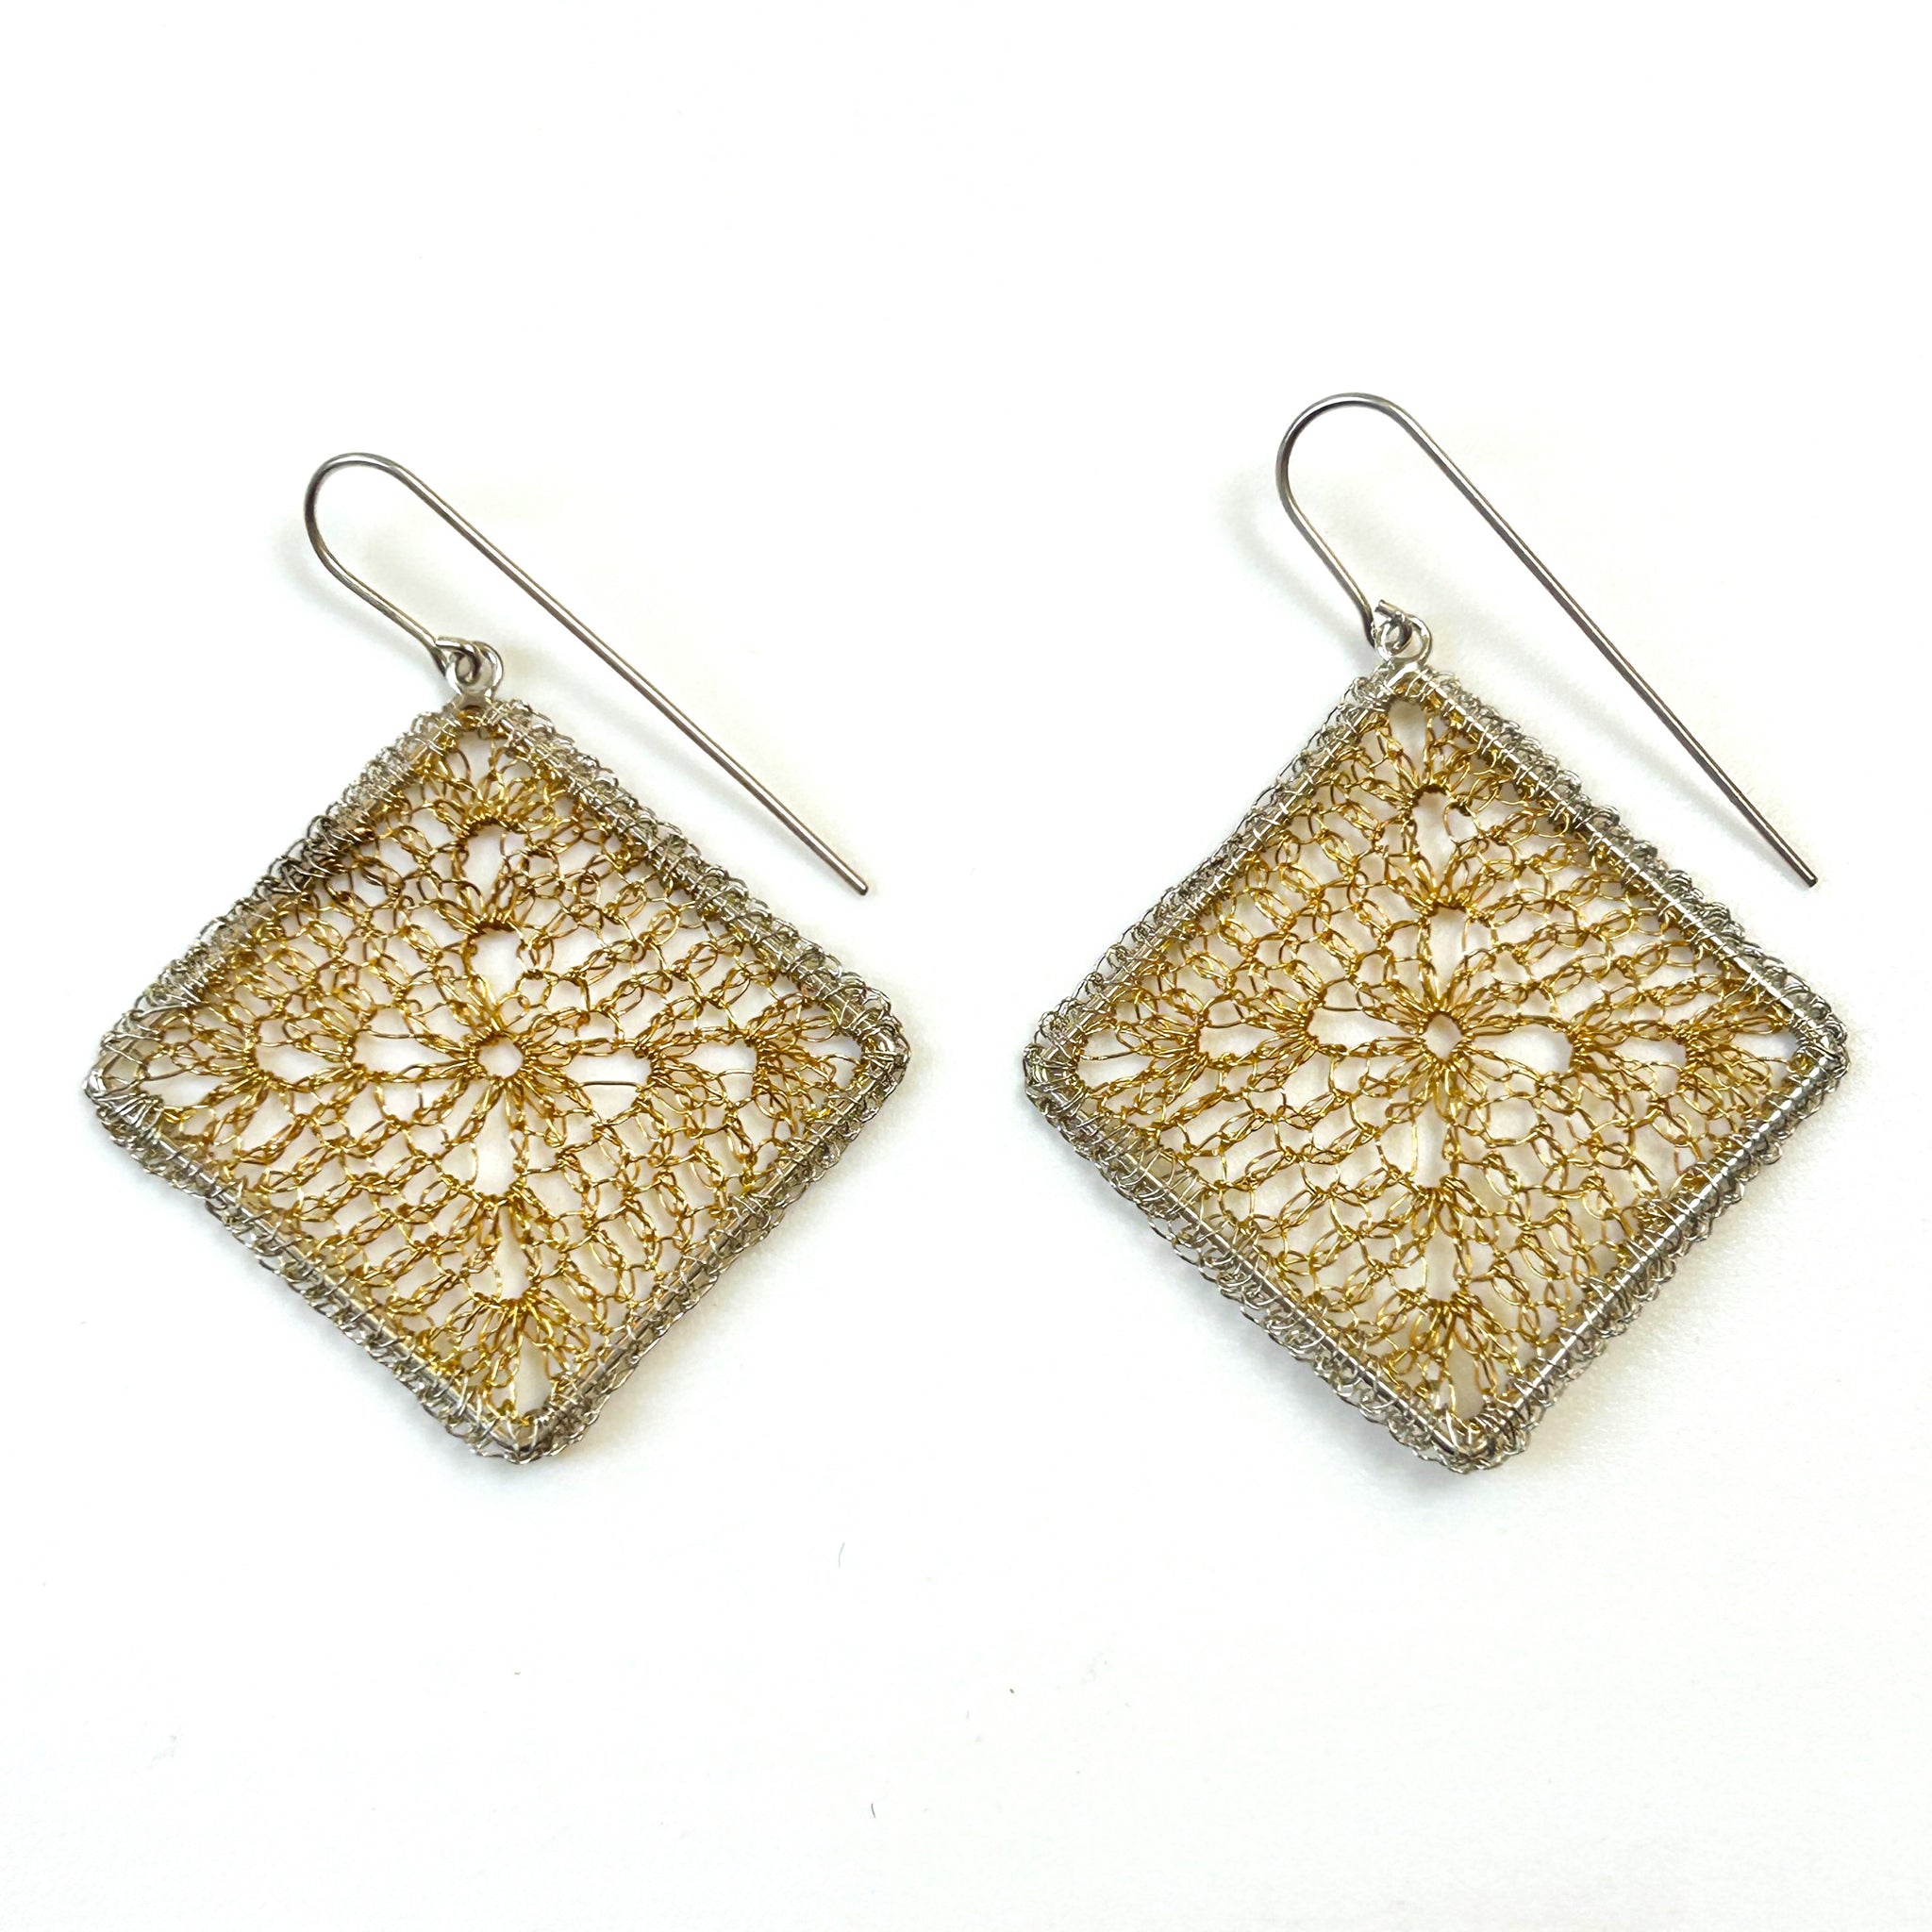 Large Handmade Silver and Gilt Earrings by Frou Frou, Poland